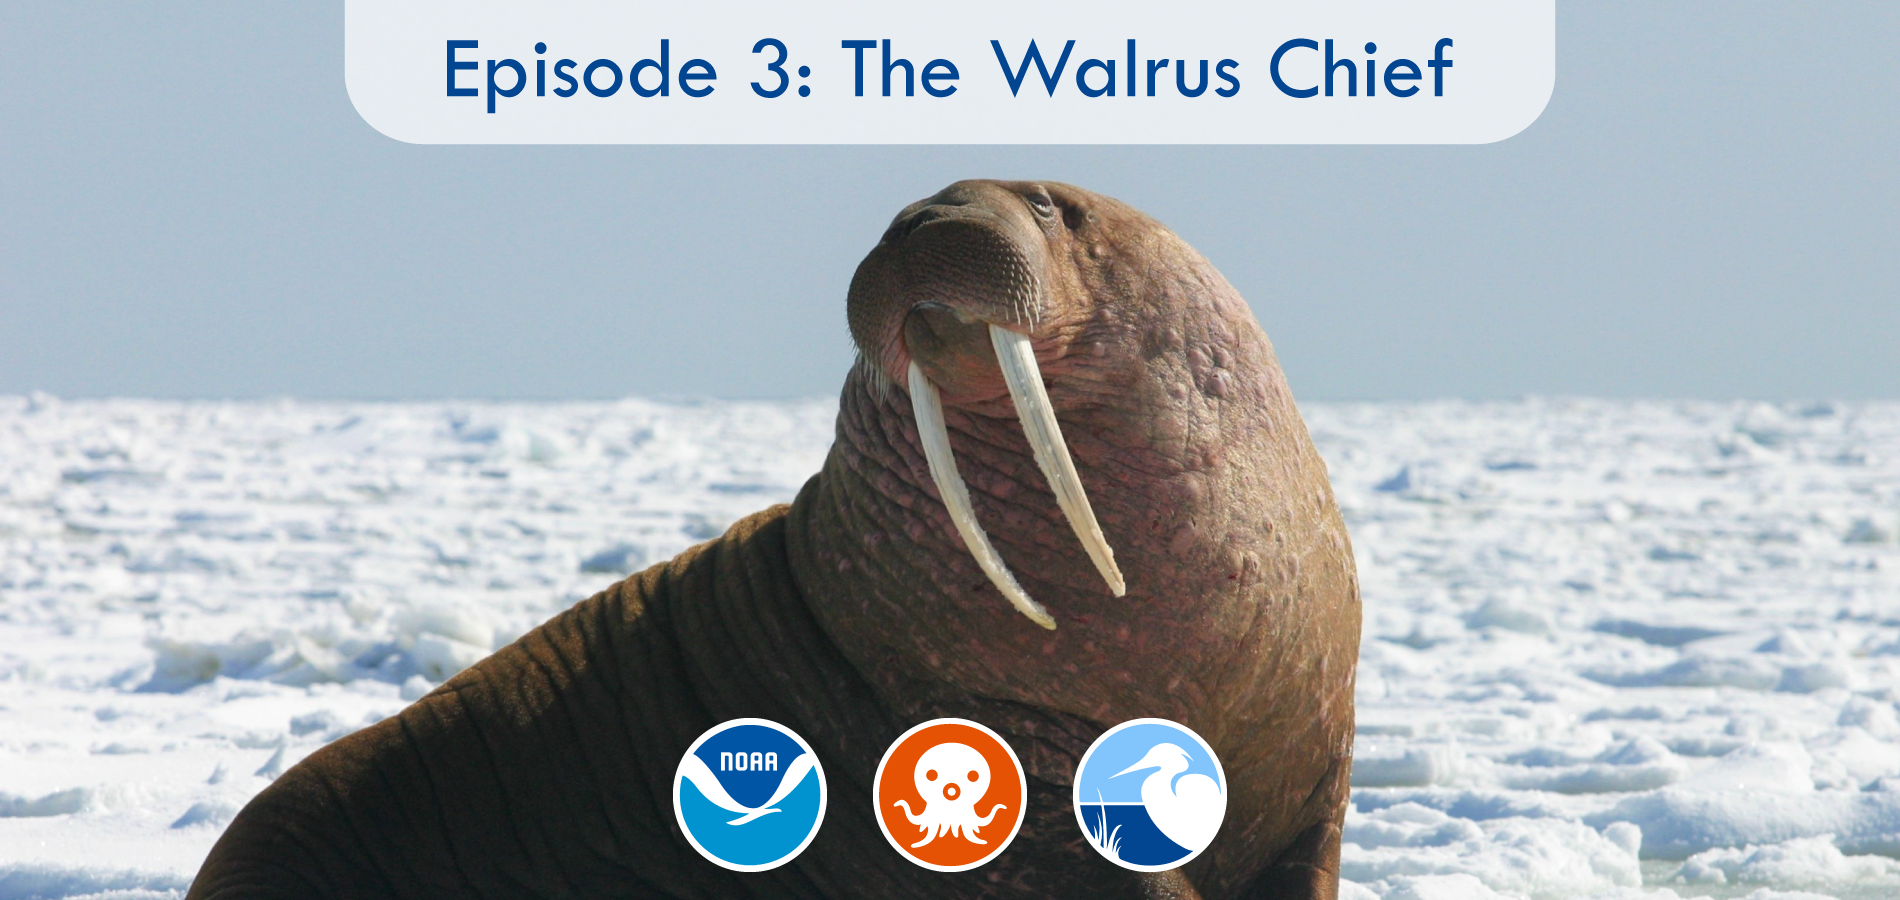 A walrus site on an icy landscape. The banner says "Episode 3: The Walrus Chief" and has the NOAA logo, the Octonauts logo, and the Coastal Ecosystem Learning Center (CELC) network logo.